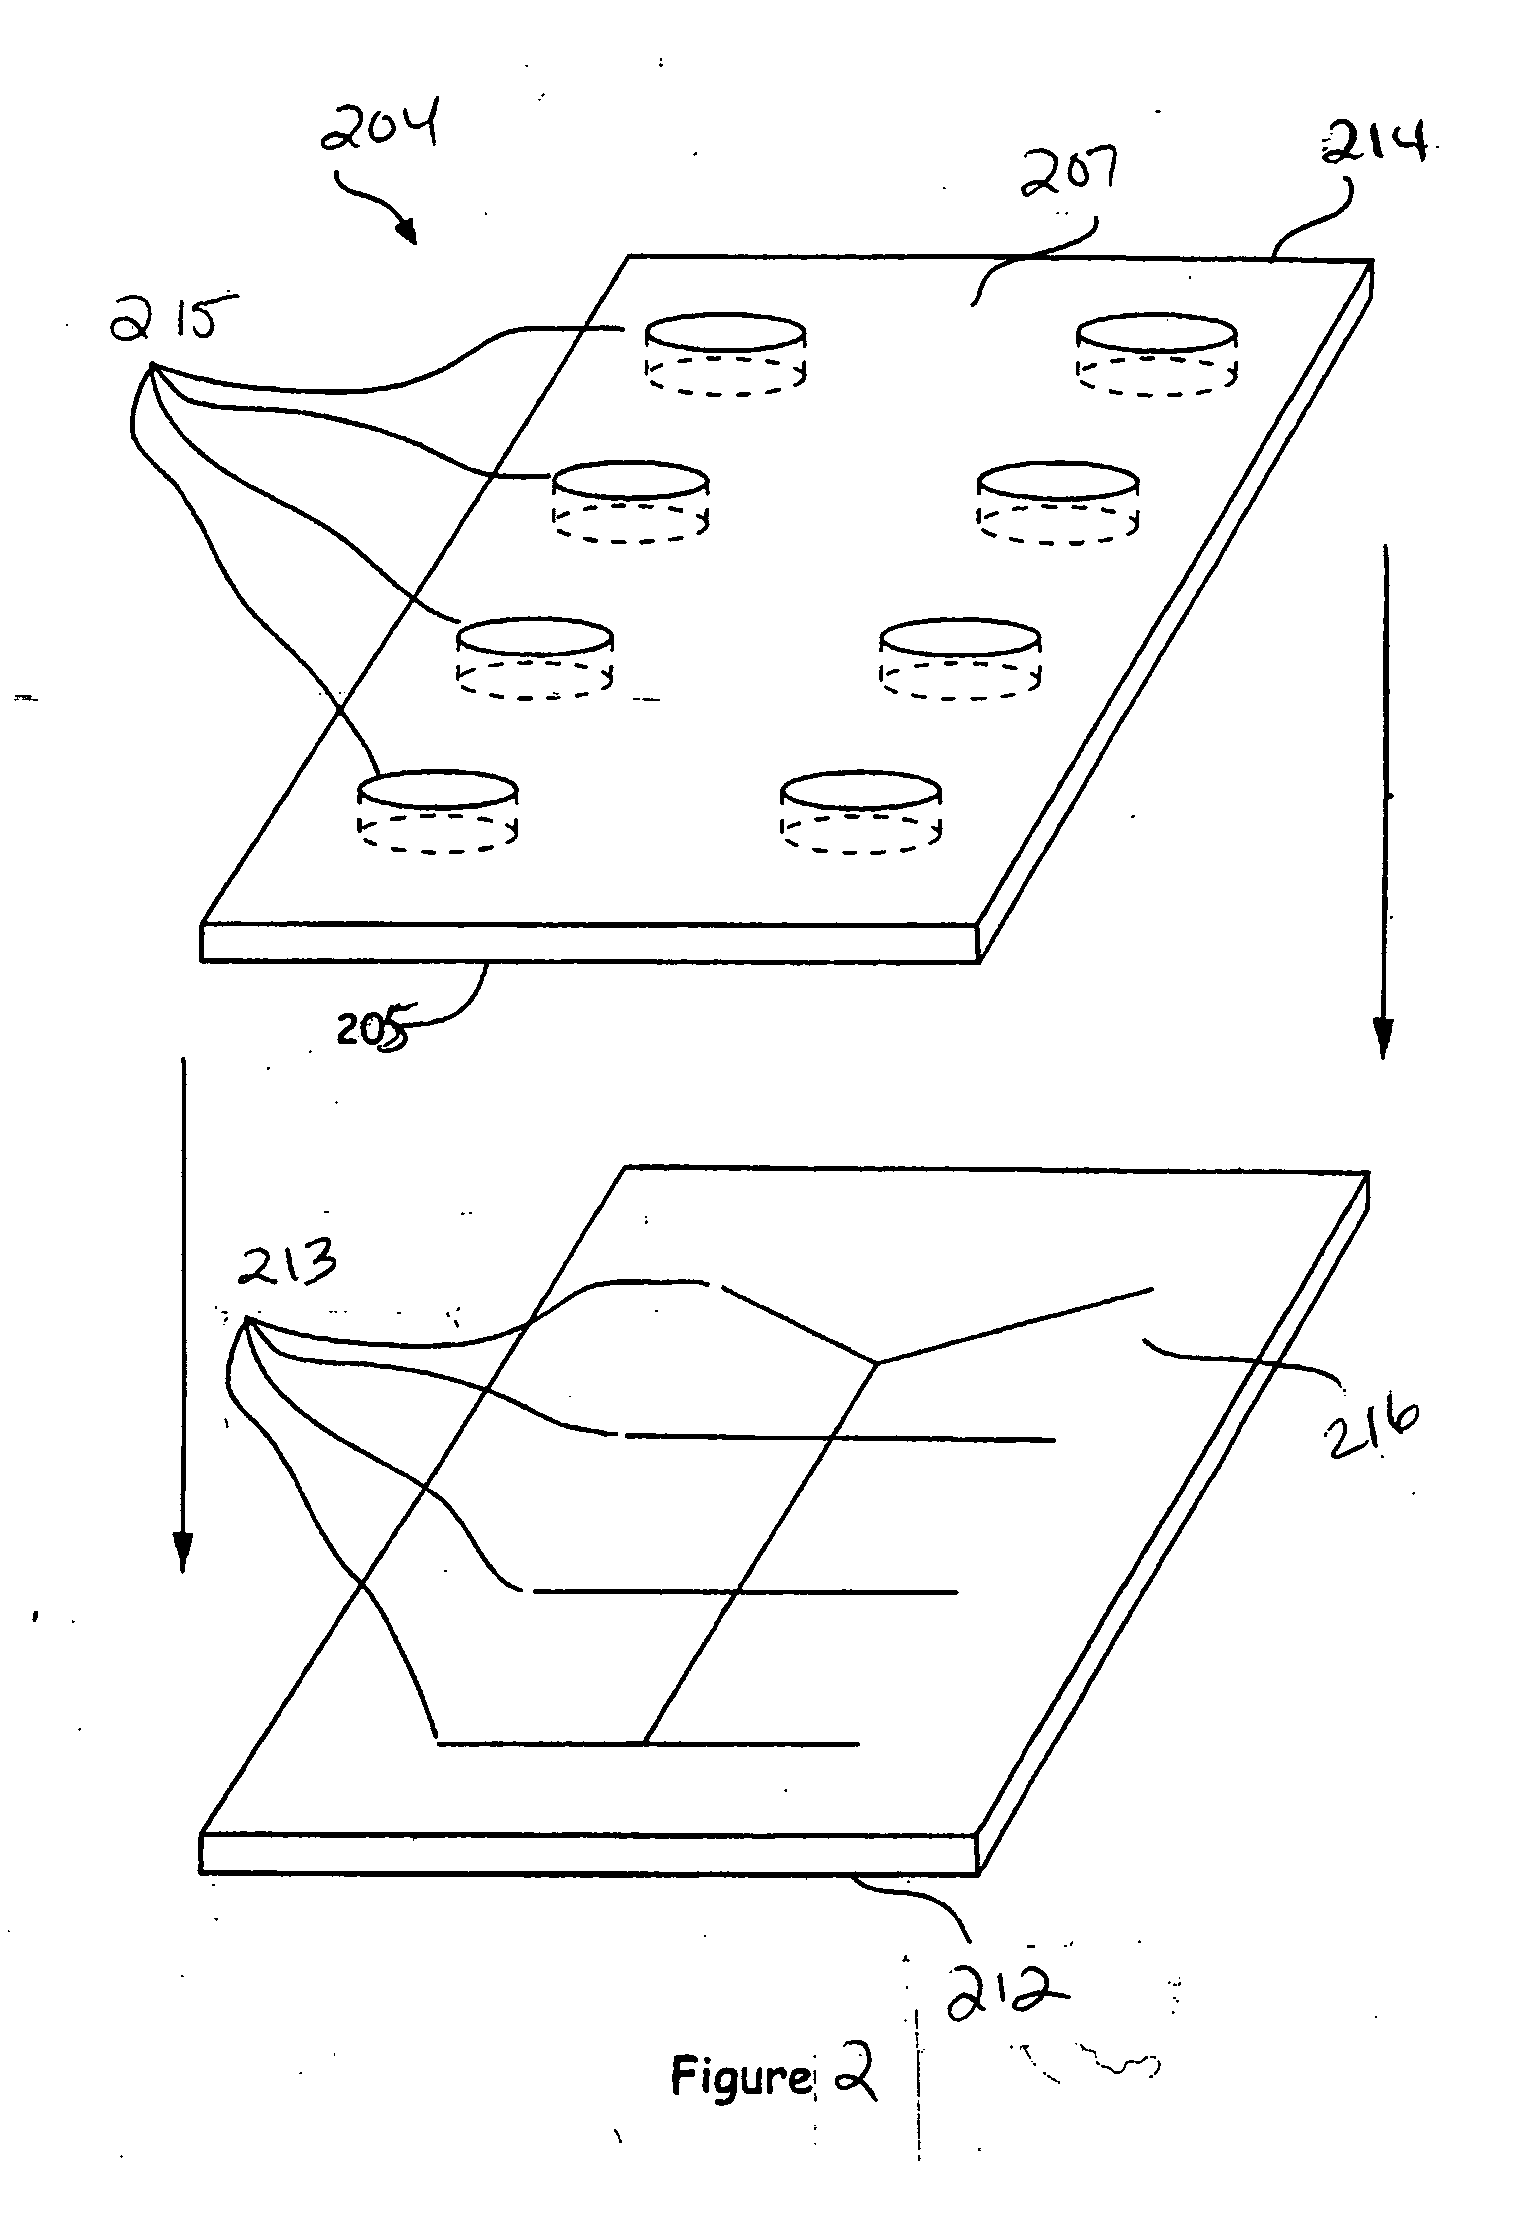 Automated system for handling microfluidic devices